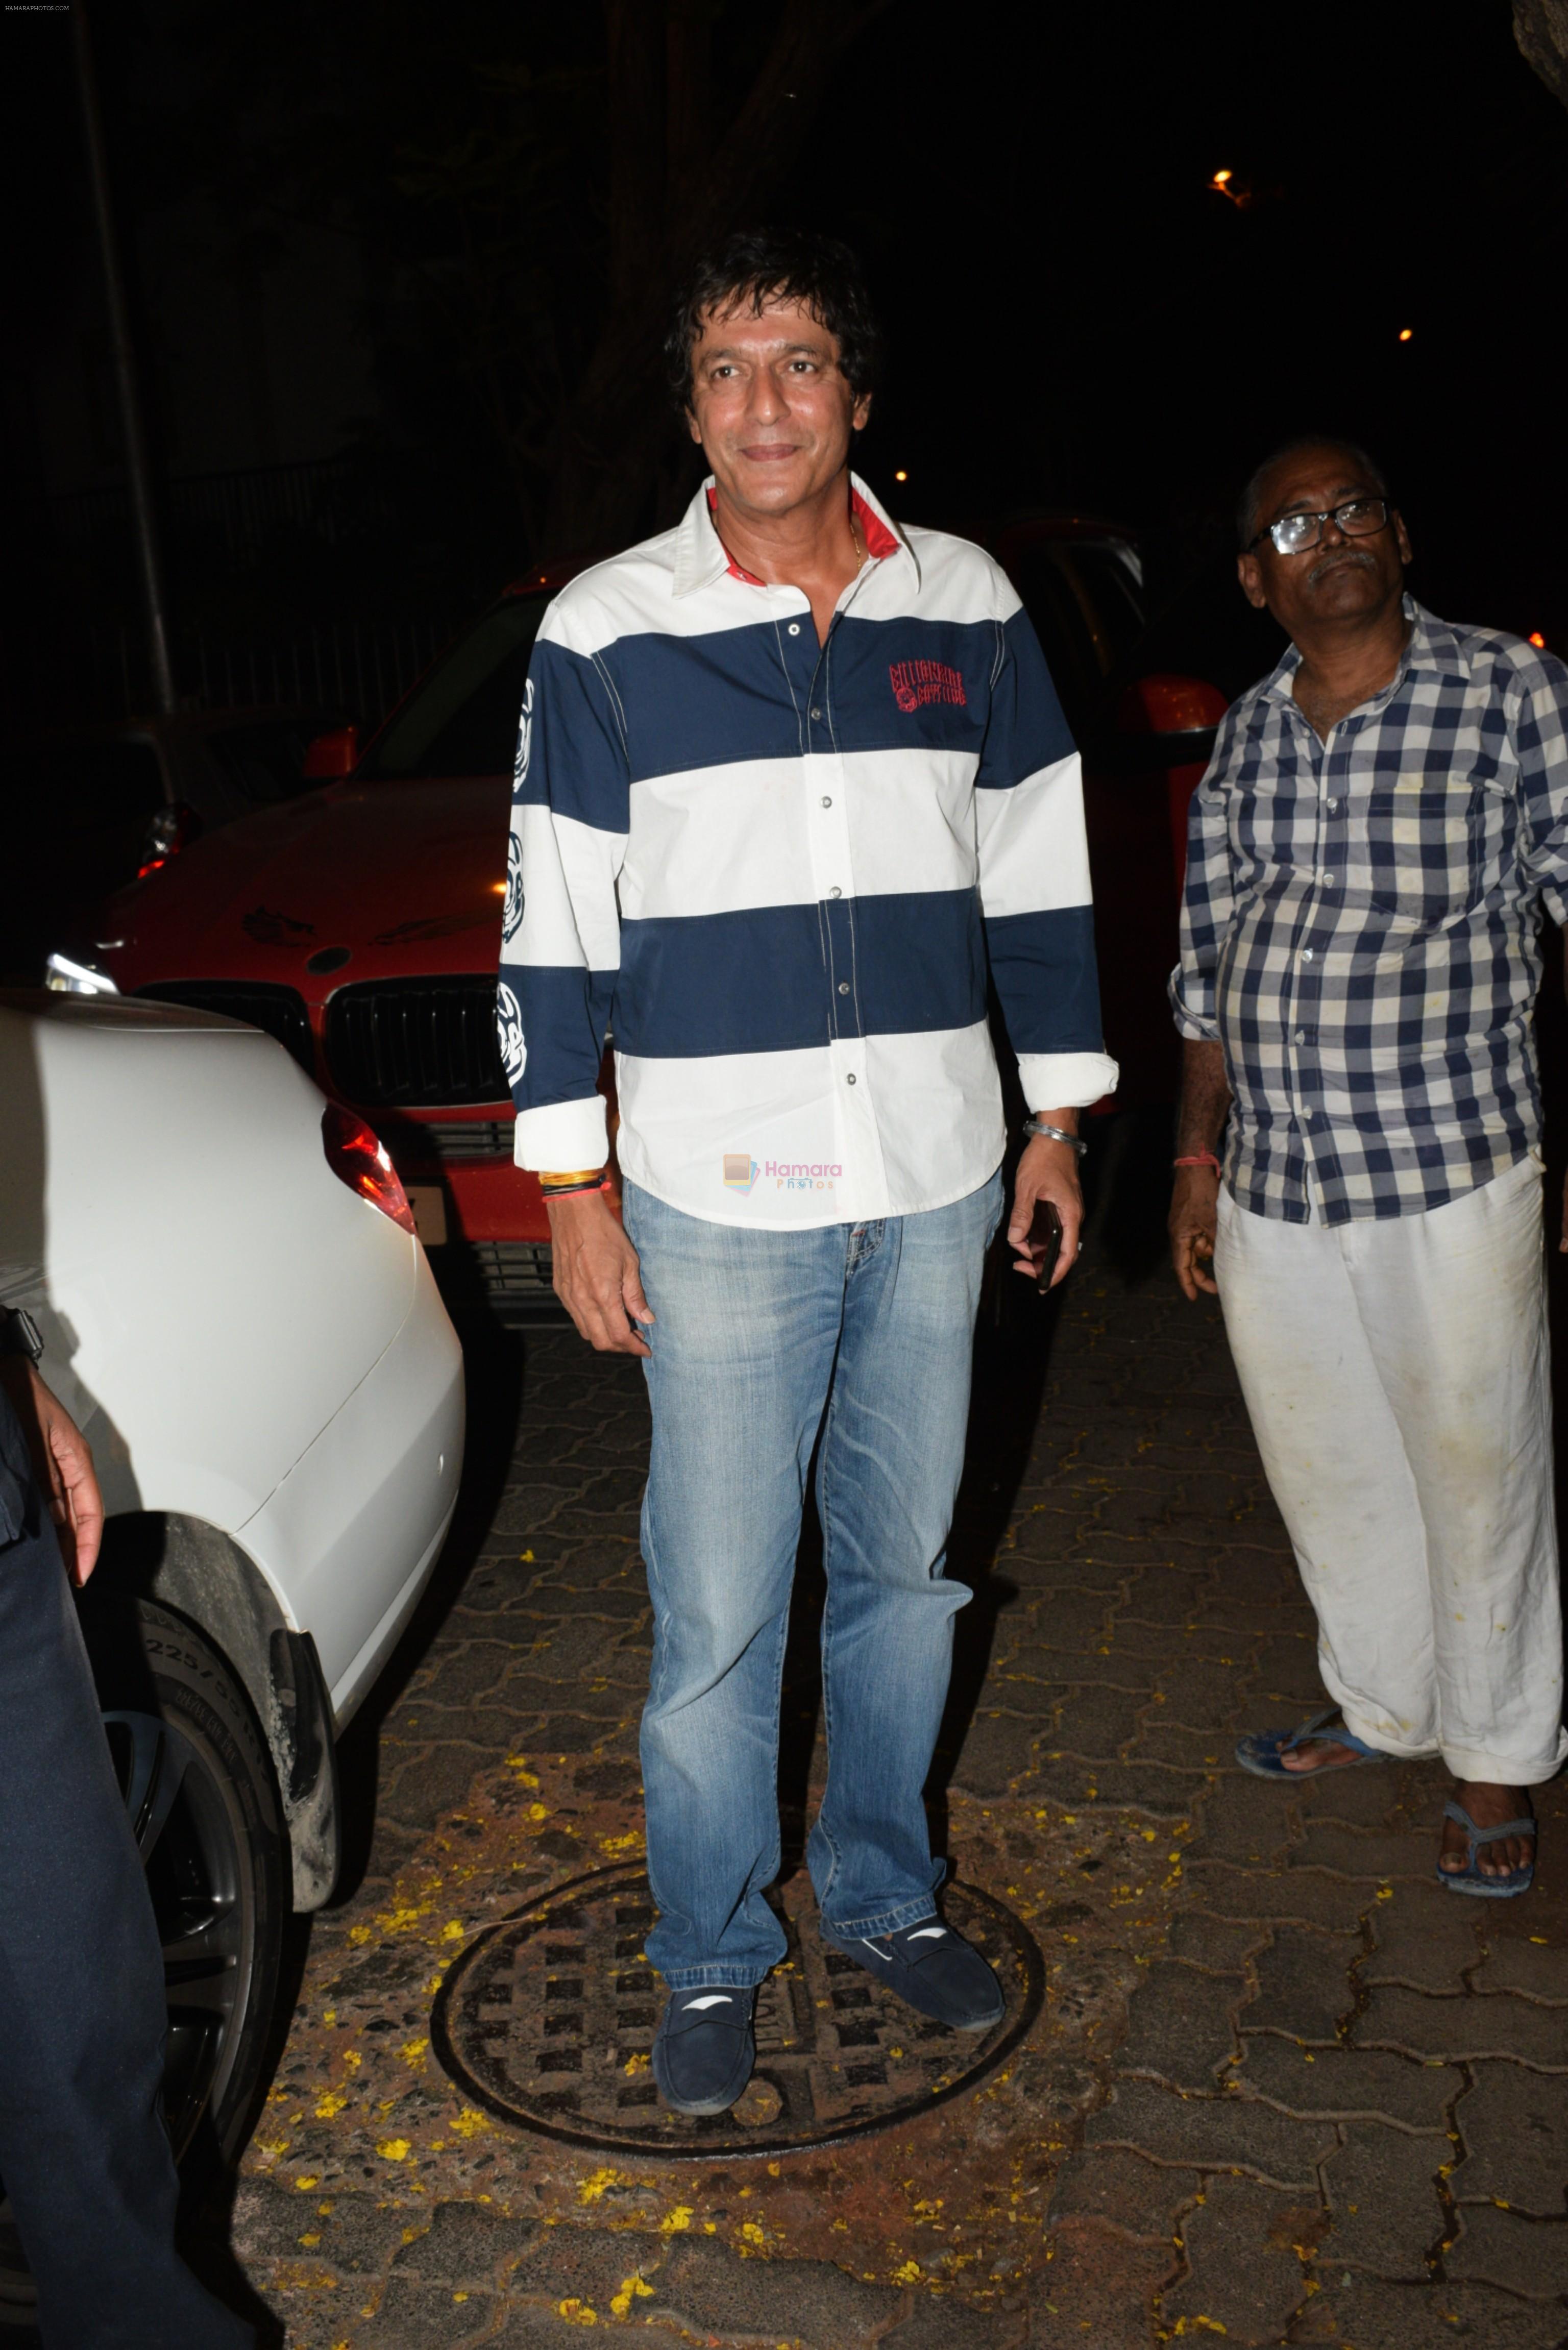 Chunky Pandey at Ekta Kapoor's birthday party at her residence in juhu on 9th June 2019